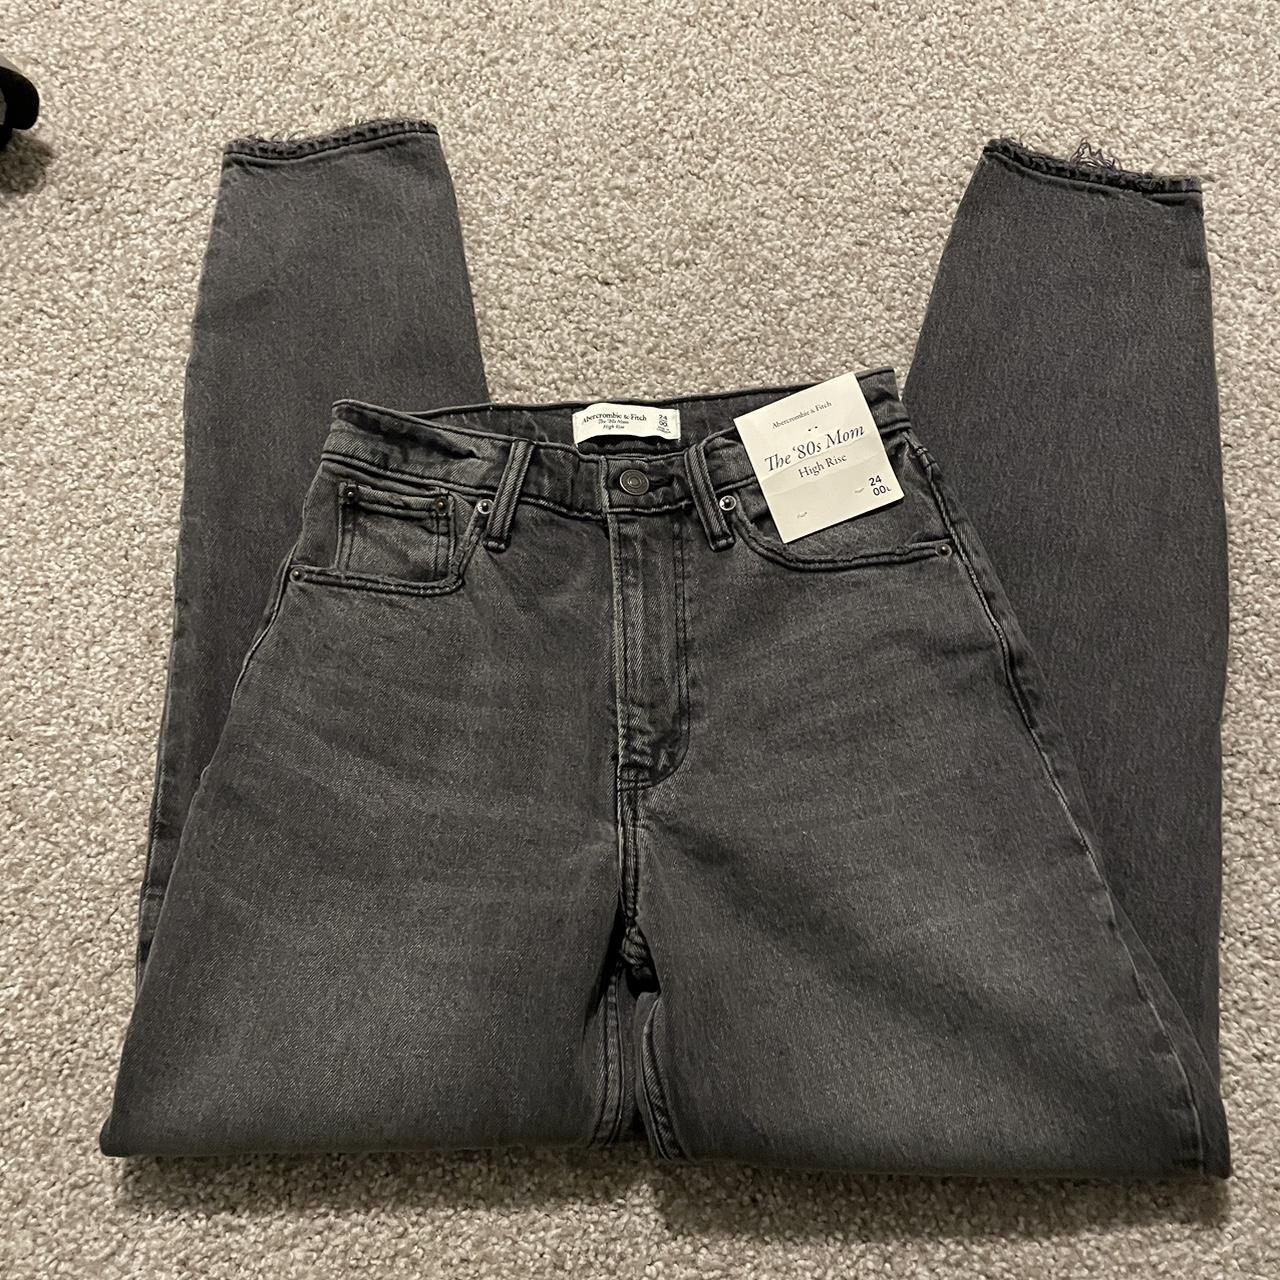 Abercrombie & Fitch Women's Grey and Black Jeans (3)